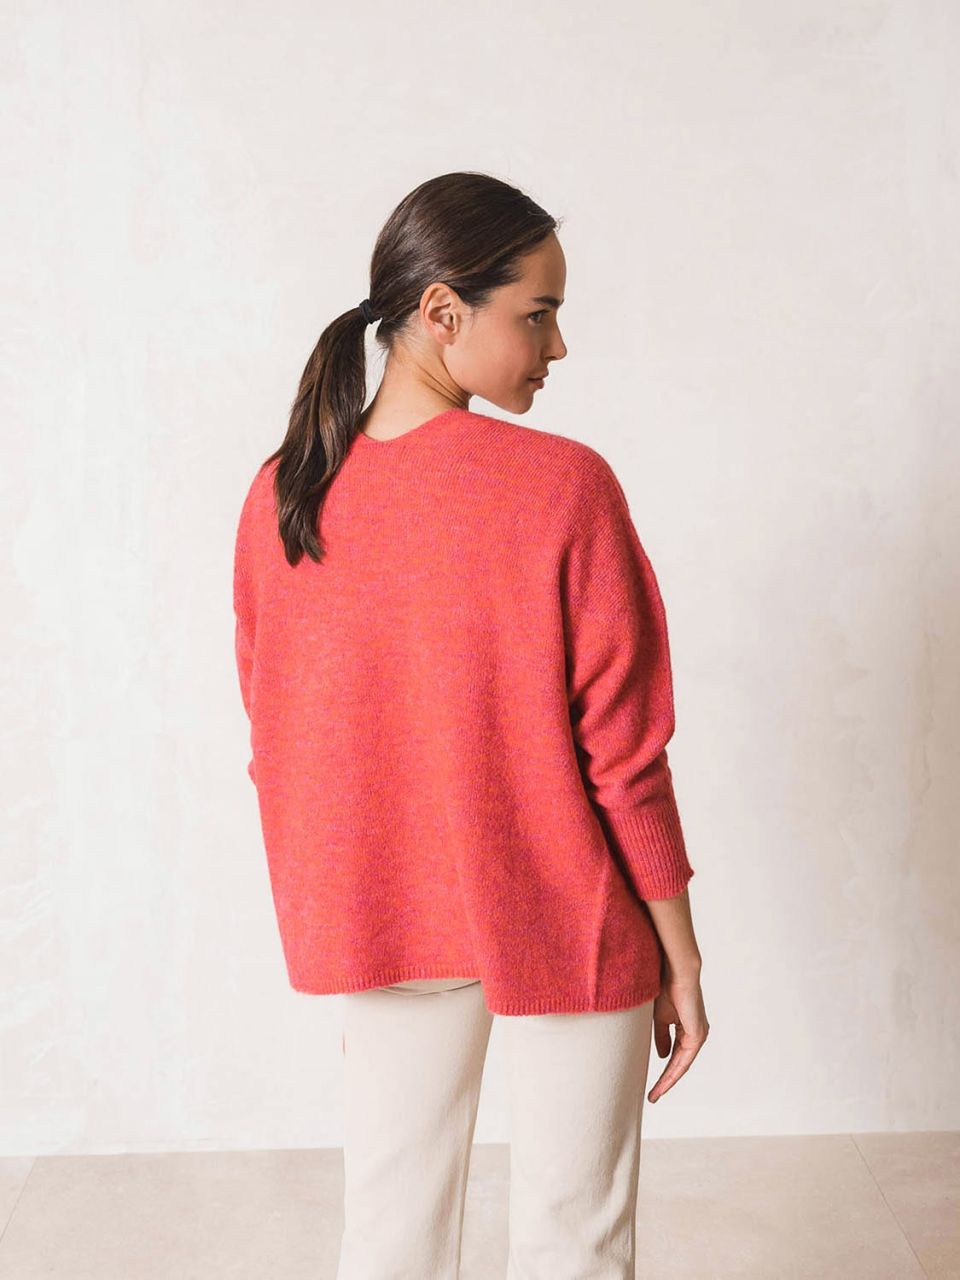 indi and cold llong knitted cardigan With a cozy neckline, lengthy draped-shoulder sleeves, and an oh-so-relaxed fit, it's a must-have for chillier temps. Plus, that pink hue is lovely. lemon cyprus boutique